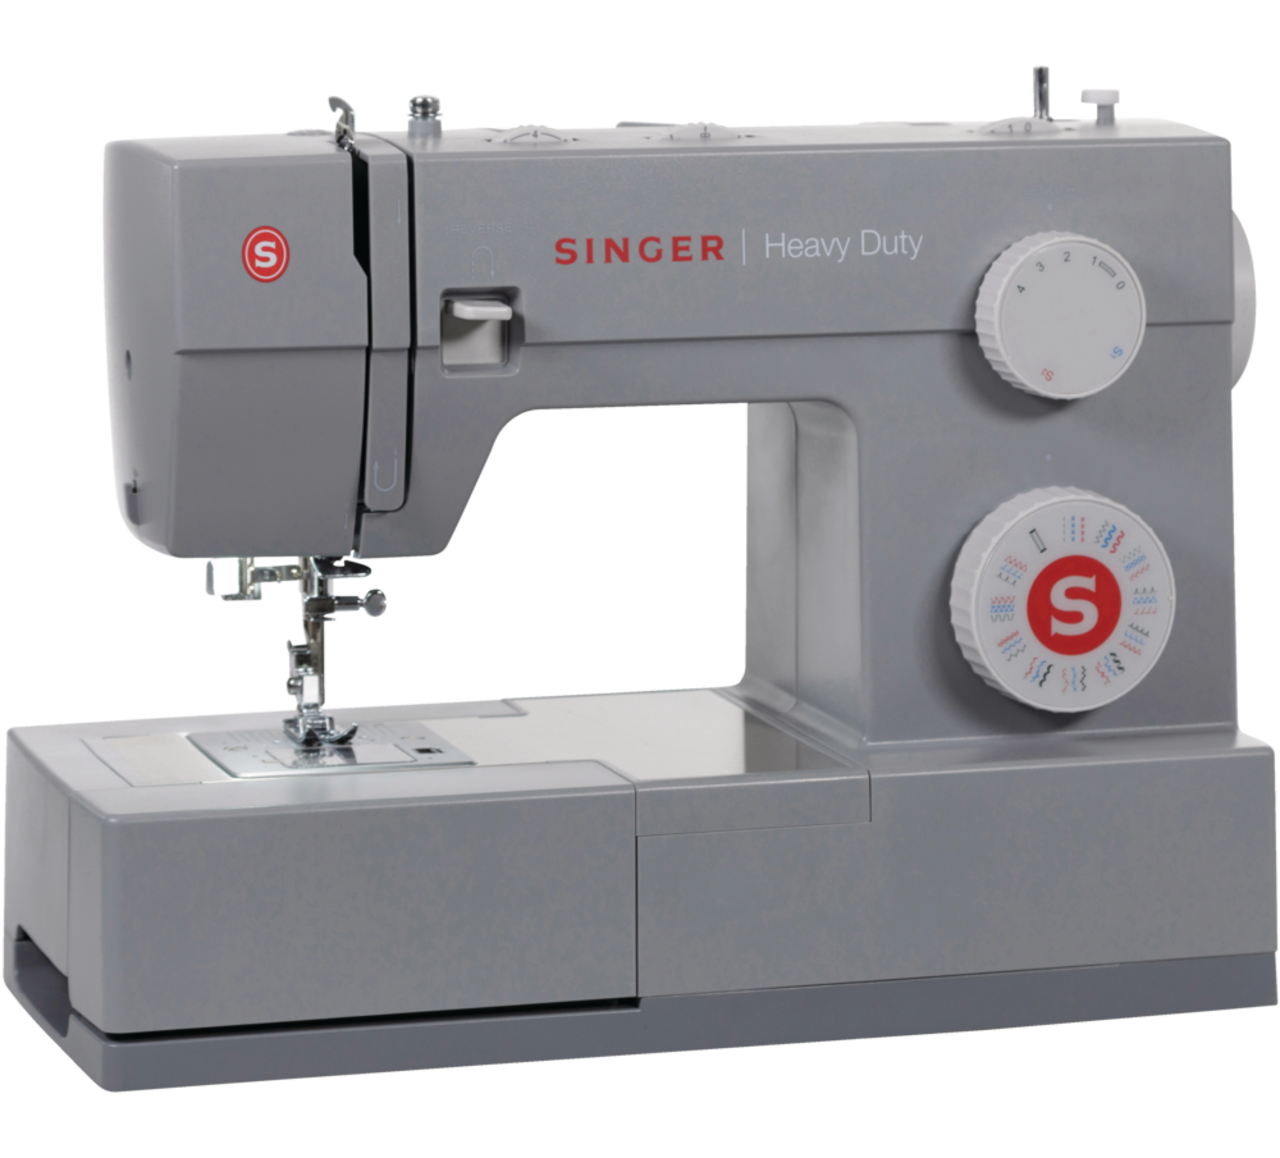  SINGER  4423 Heavy Duty Sewing Machine With Included